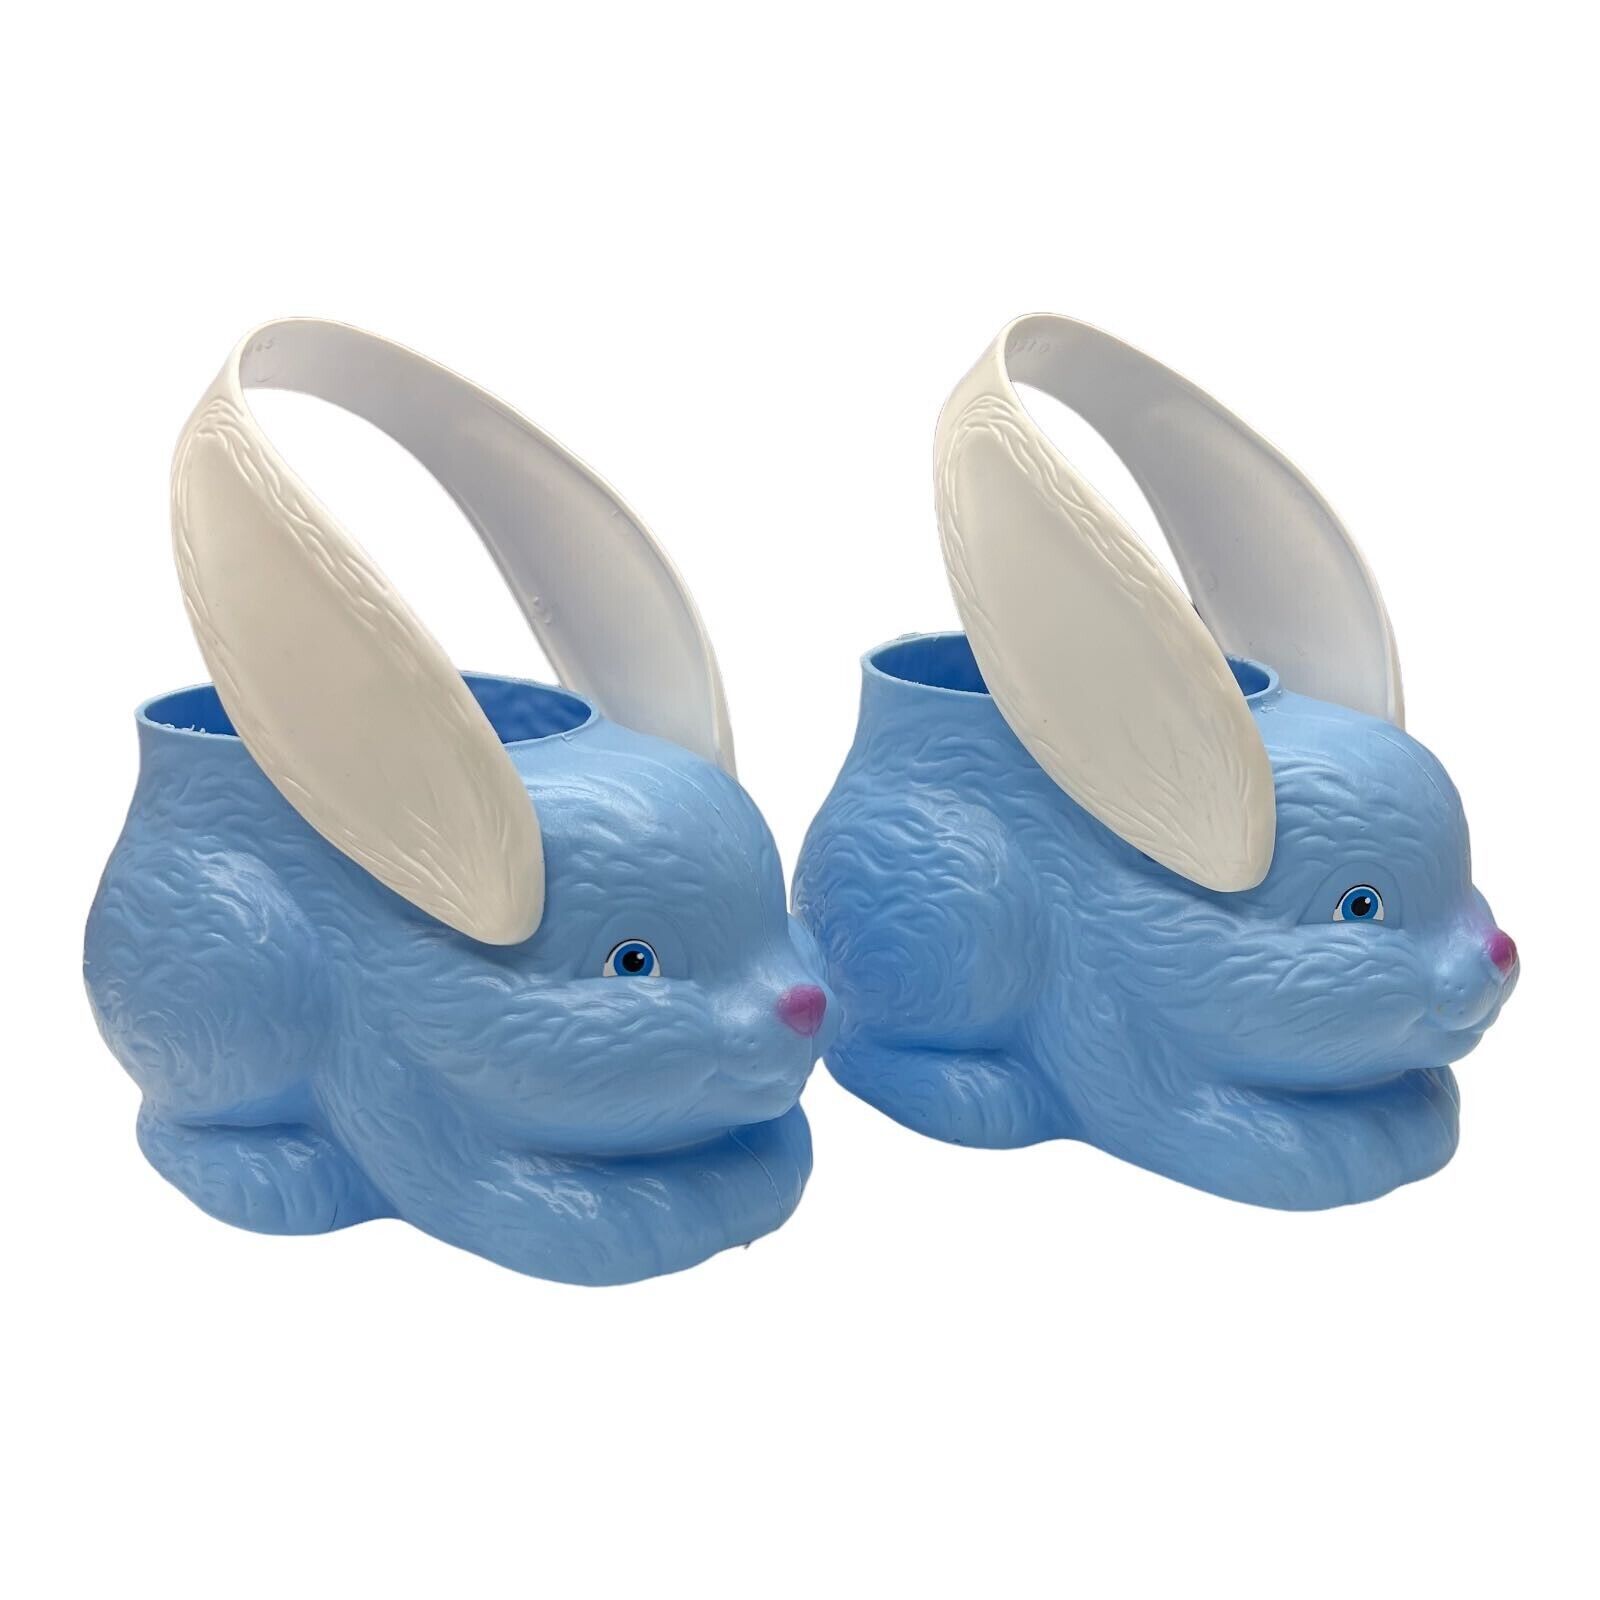 1995 Empire Bunny Rabbit Blue Easter Candy Basket Blow Mold Plastic Lot of 2 Vtg - $38.03